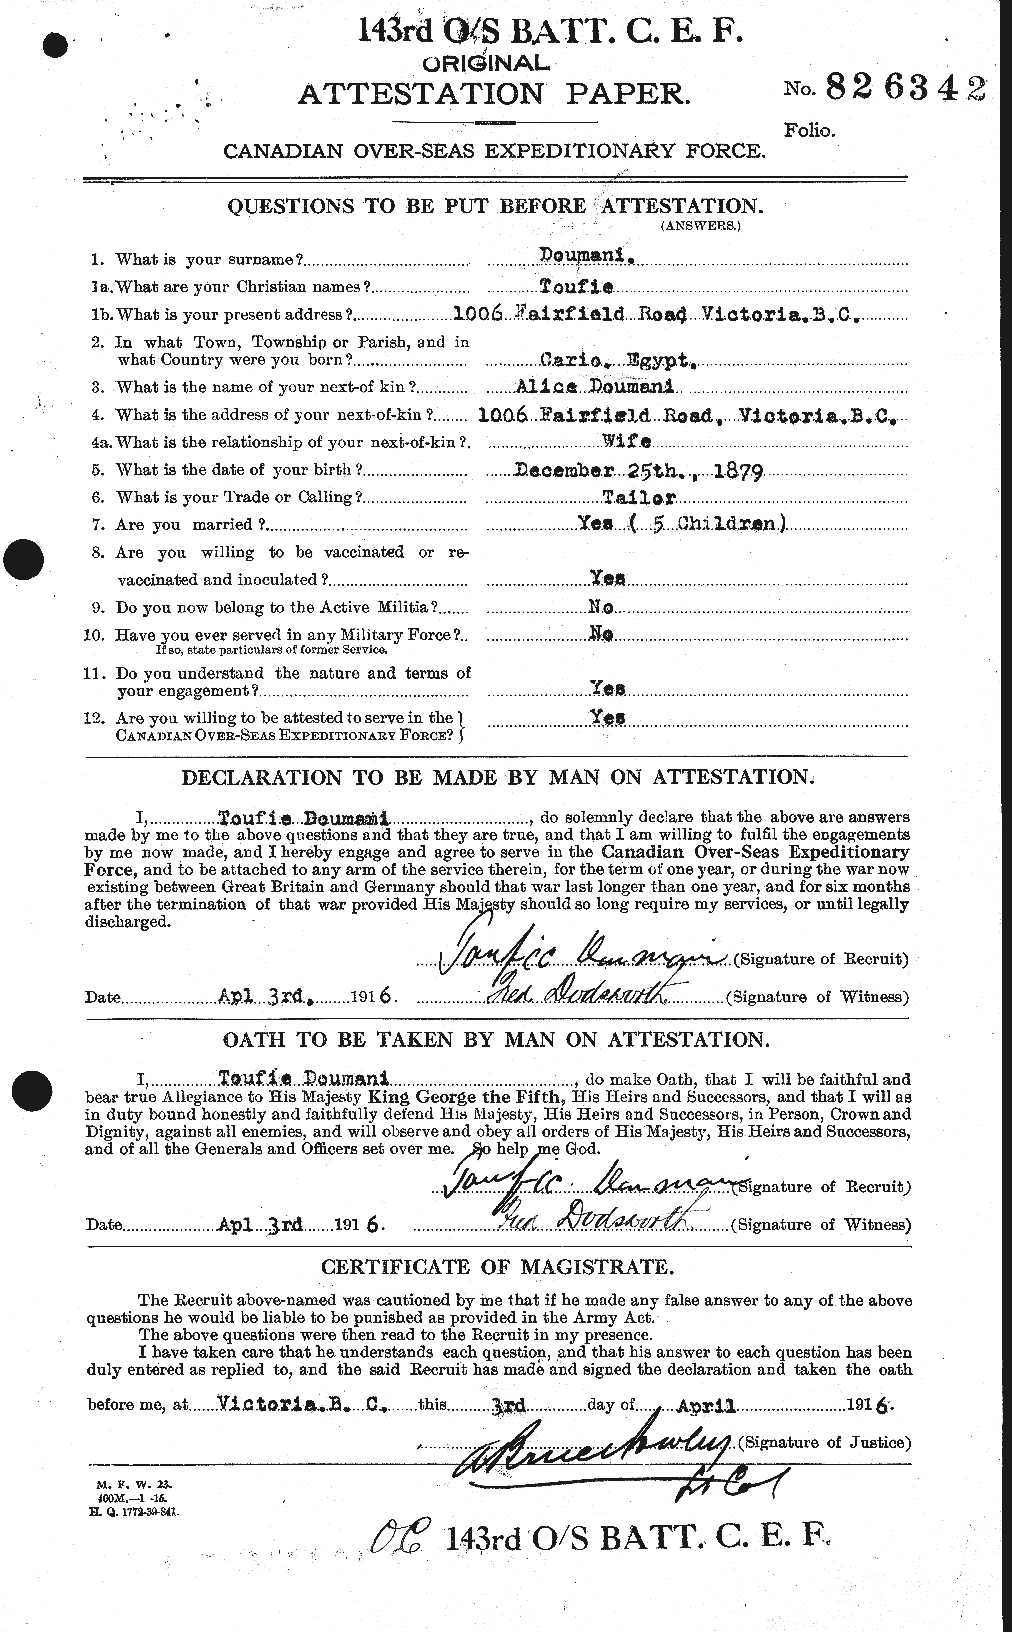 Personnel Records of the First World War - CEF 296858a